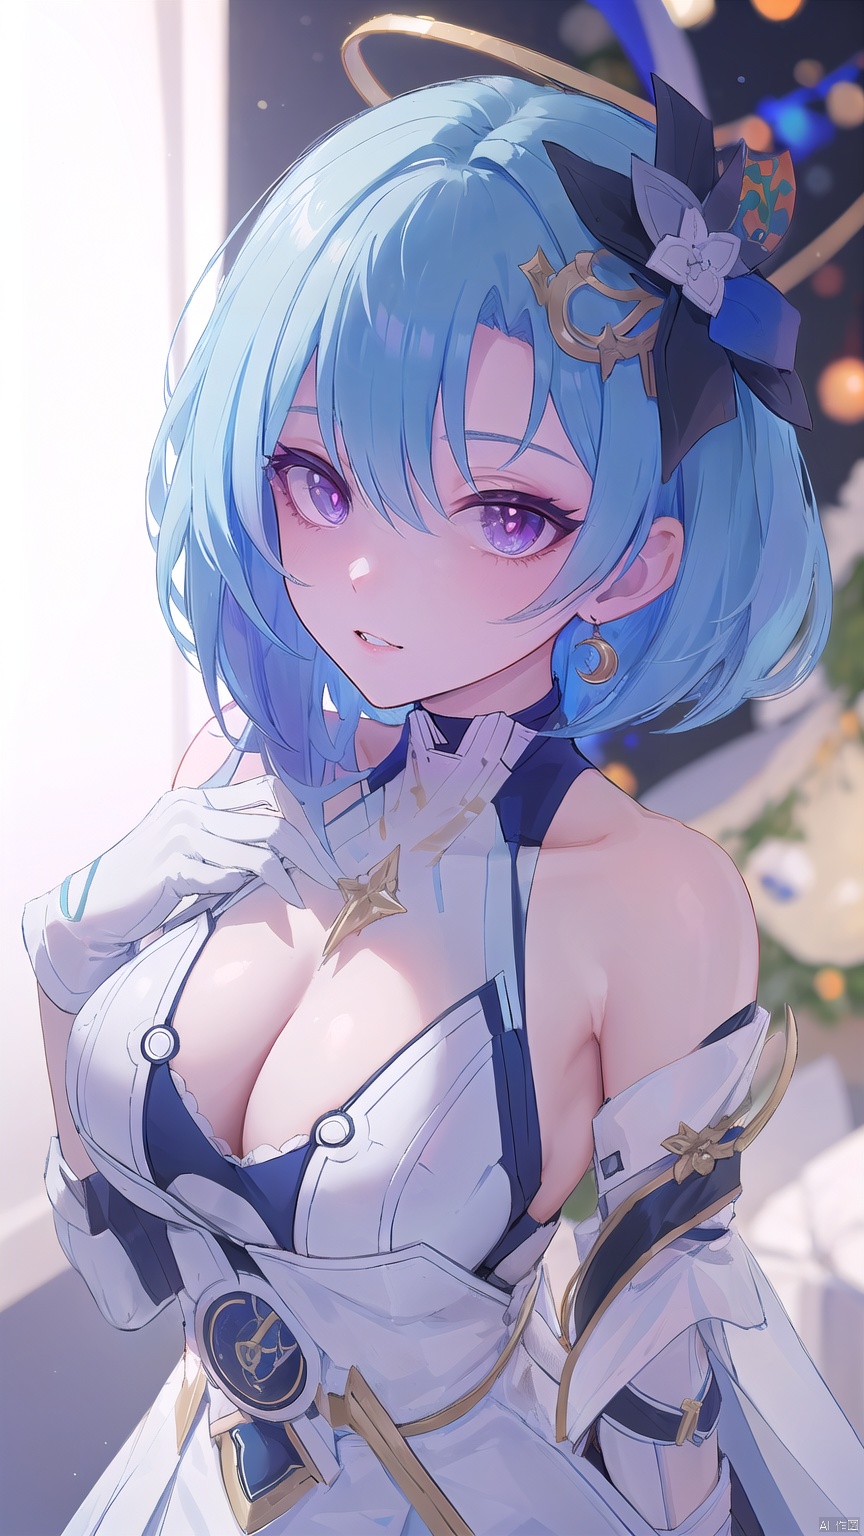  1 girl, solo, portrait, in Sexy off-the-shoulder Christmas skirt, look at viewer, blue eyes,Cool tone, Professional studio, Behind is the Christmas tree and Christmas presents, short hair, necklace, earings, elegant, , light master

dglx, 1girl, gloves, purple eyes, blue hair, , Anime